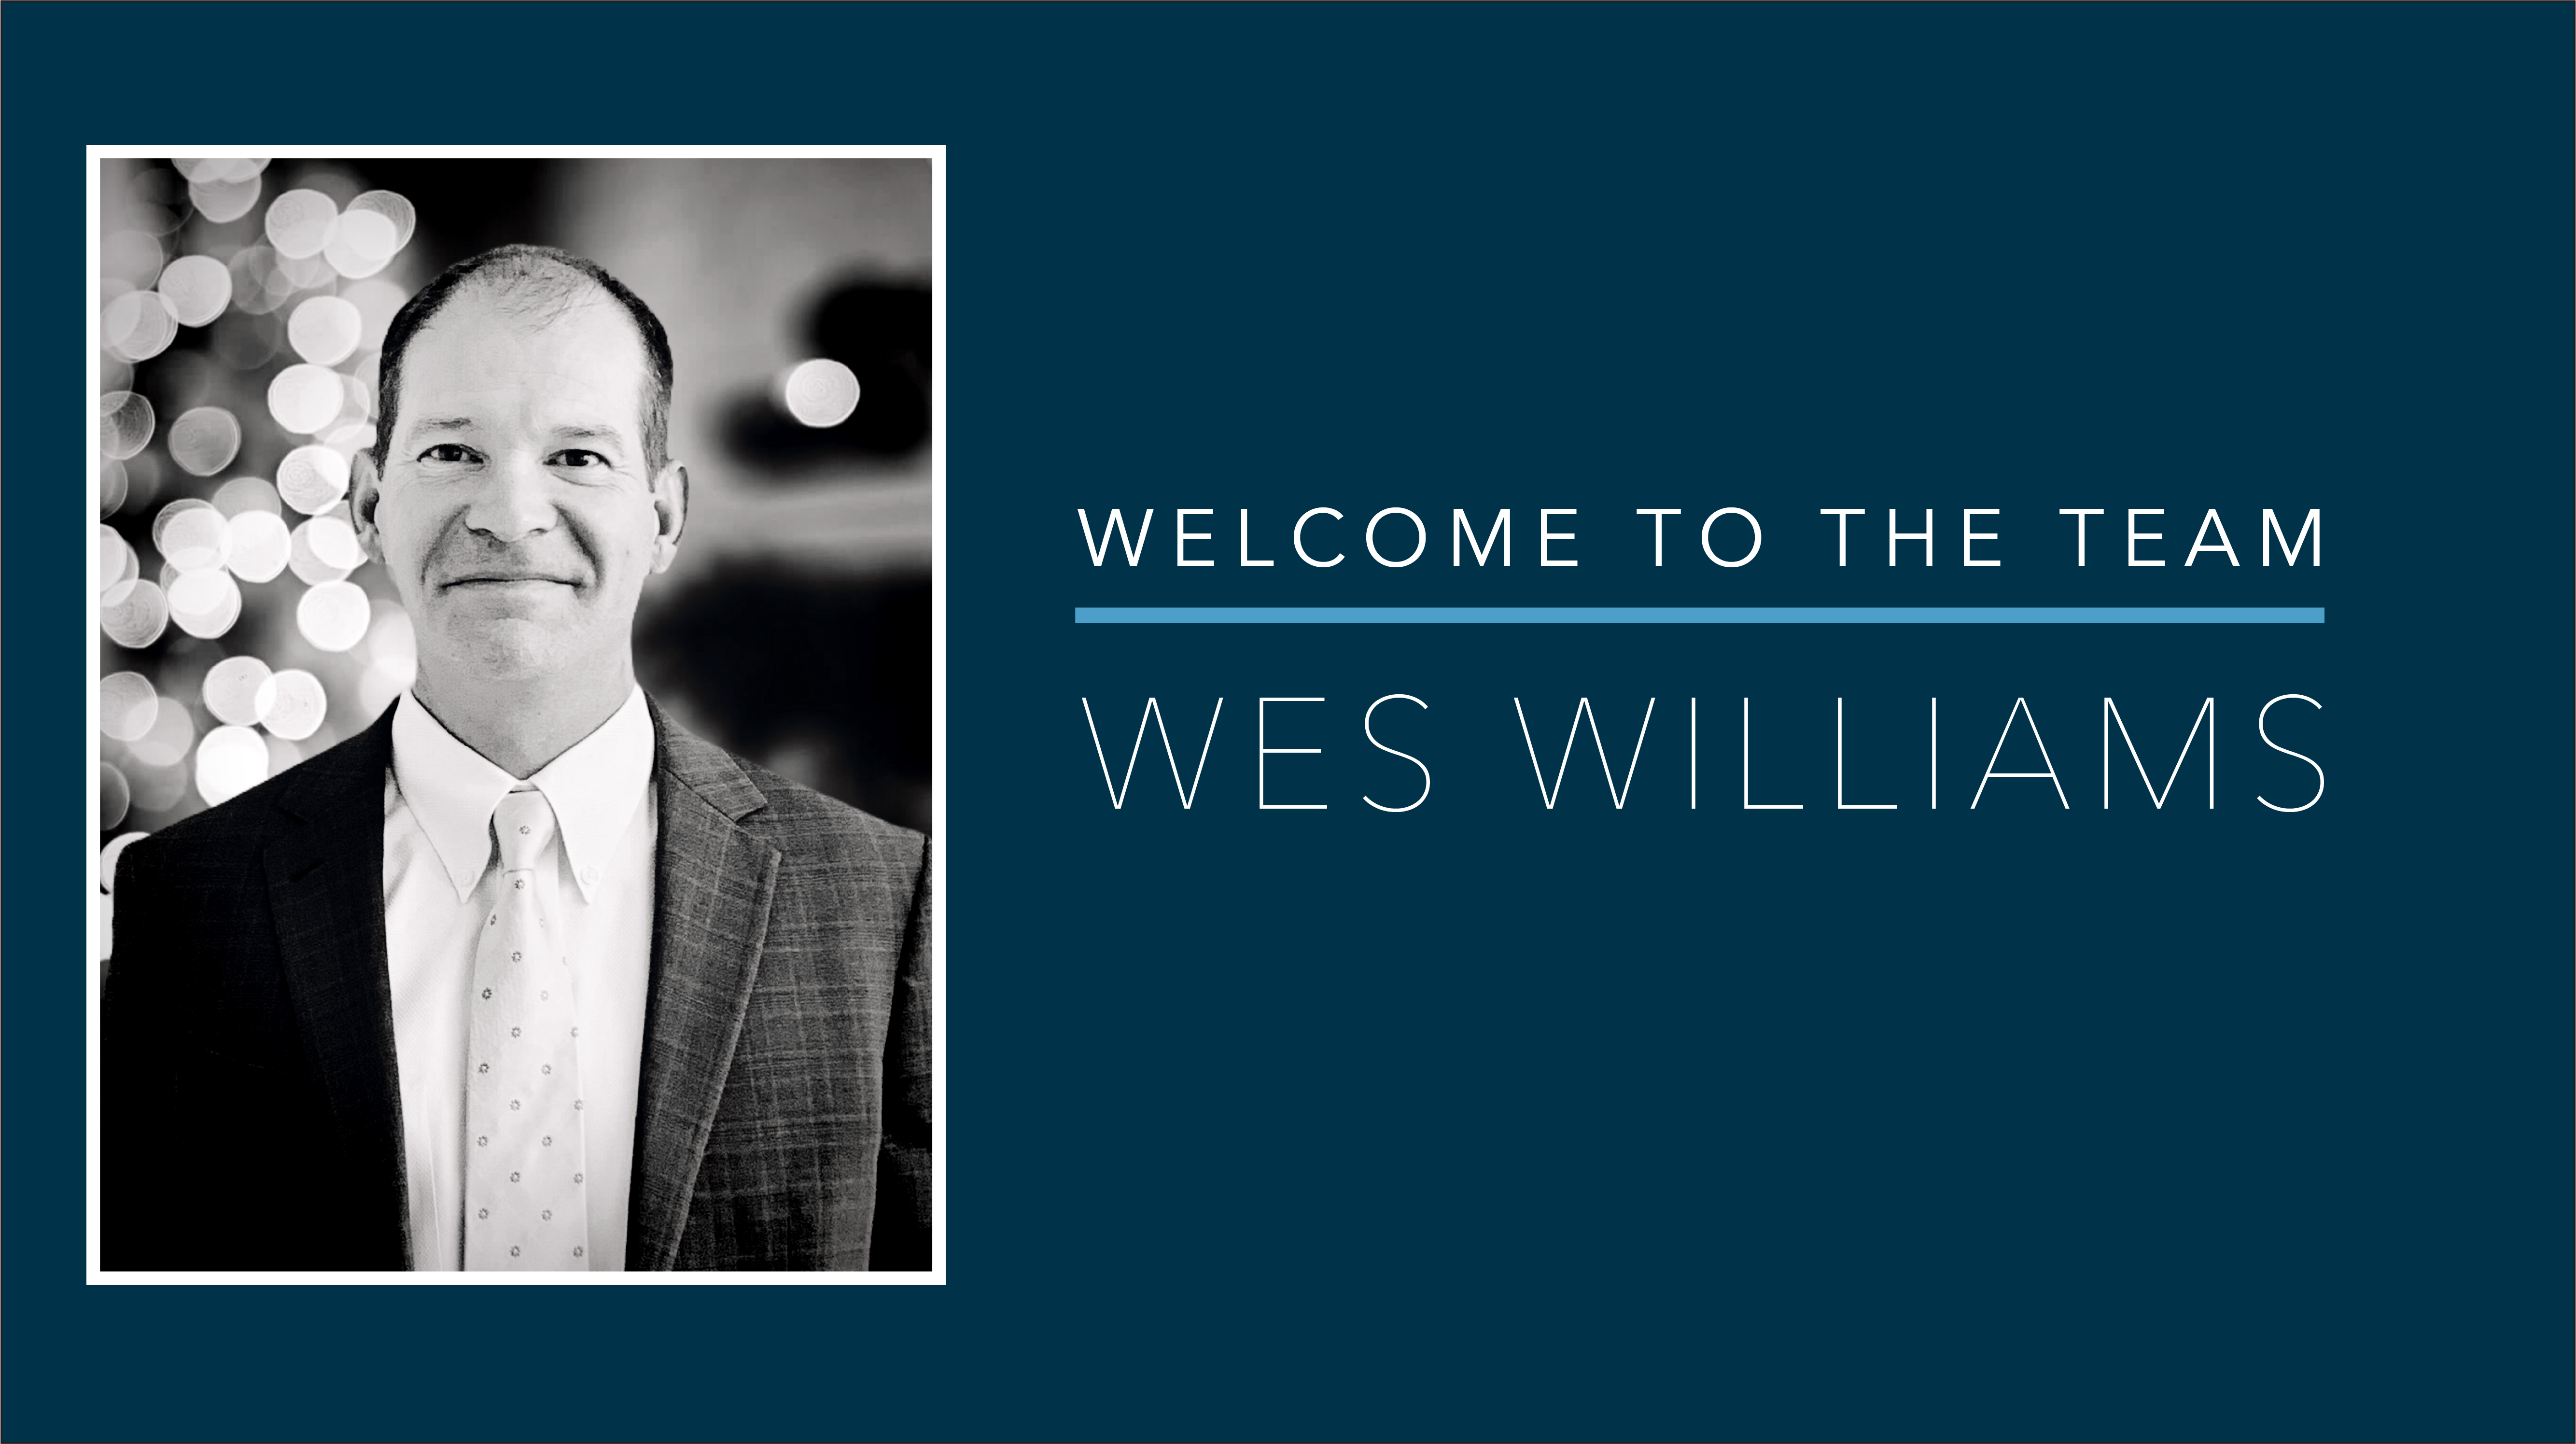 Welcome to the team message with Wes Williams’ image